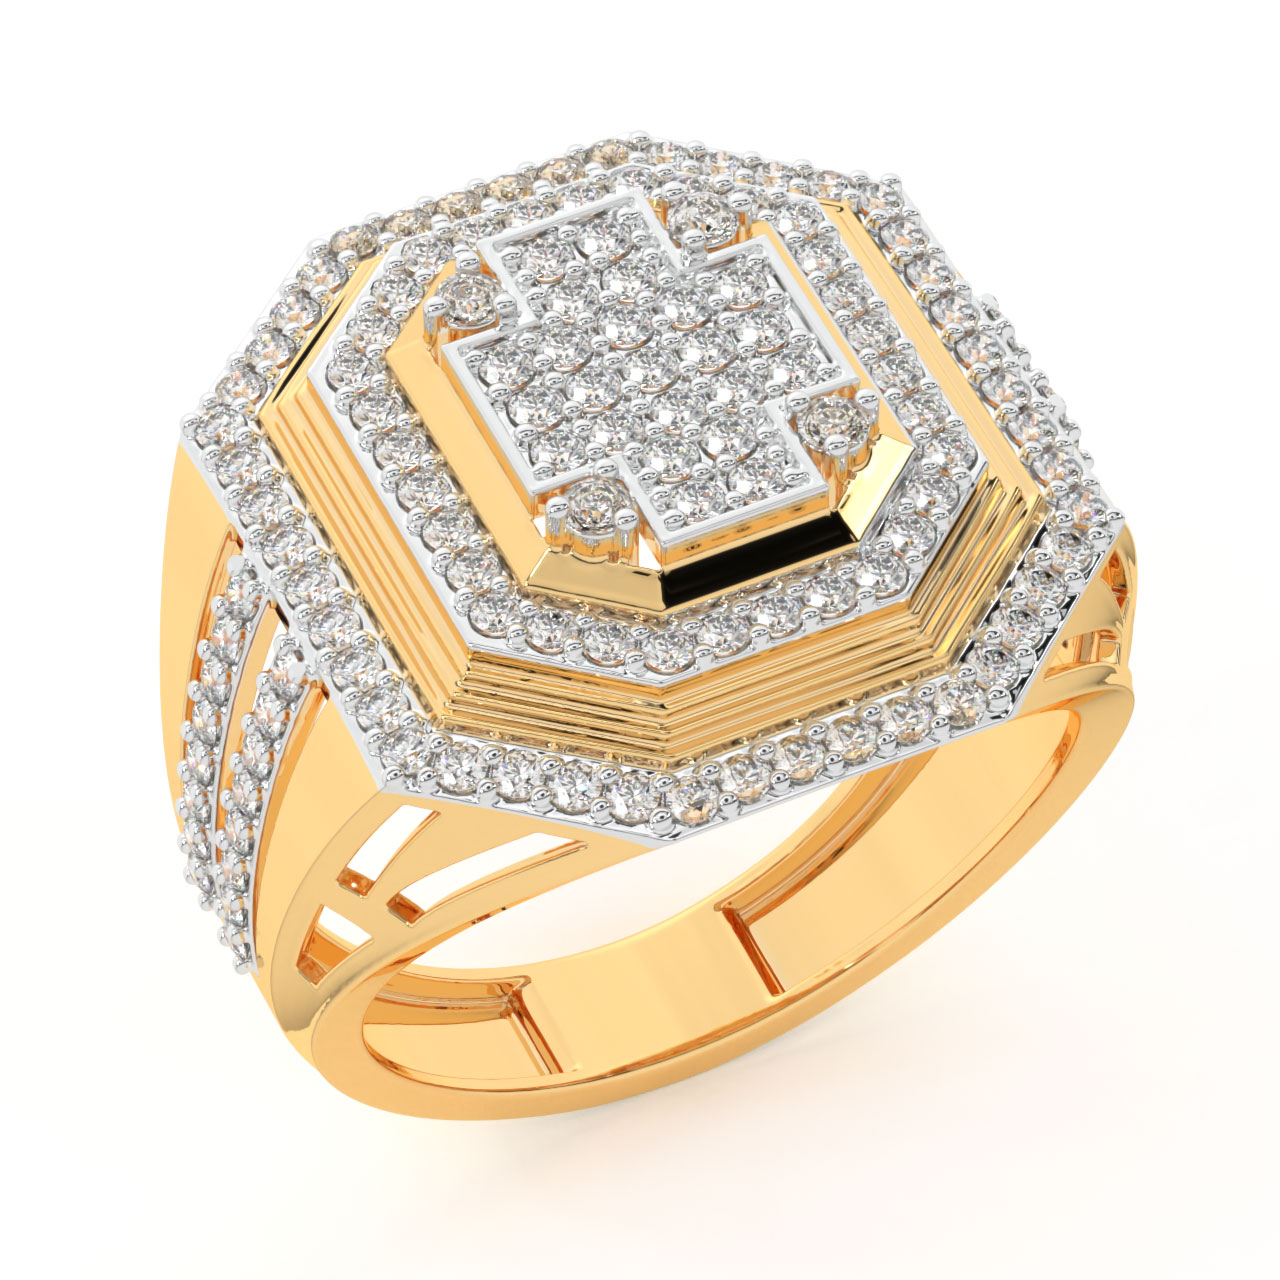 Buy MALABAR GOLD AND DIAMONDS Mens Gold Ring FRANDZ0004 Size 22 | Shoppers  Stop